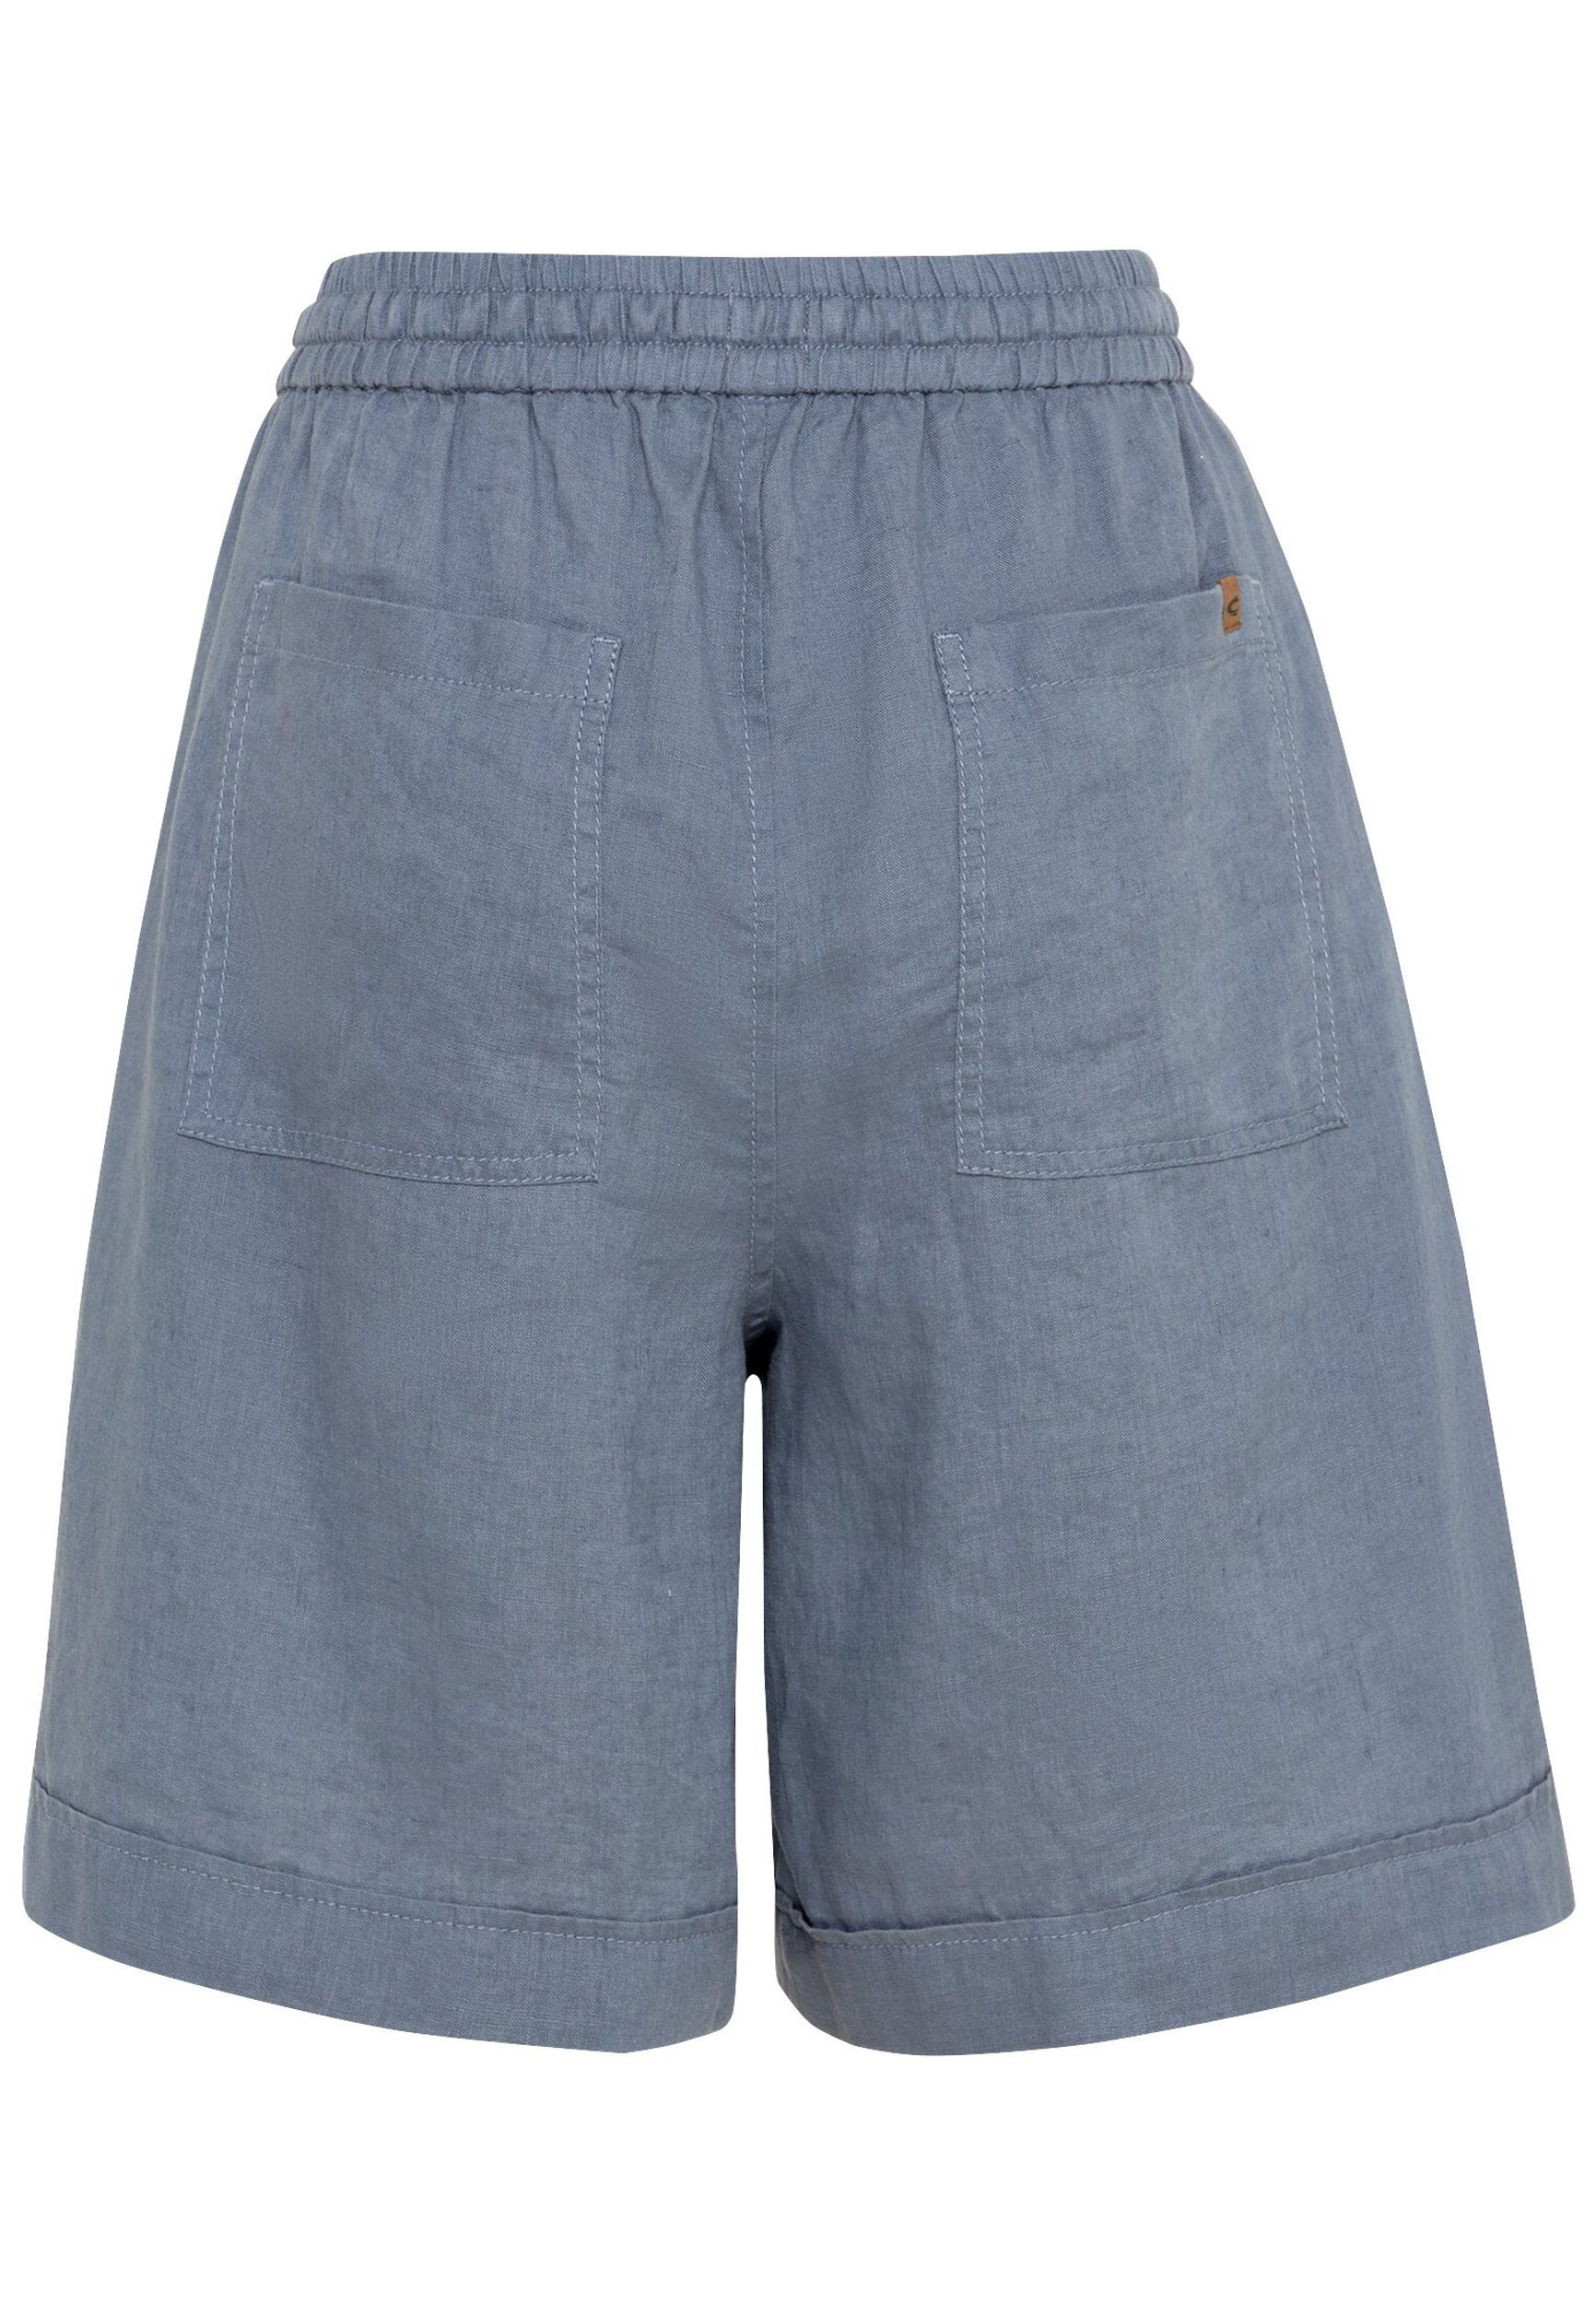 Camel Active |  Camel Active Jeansshorts  | 29/IN | navy